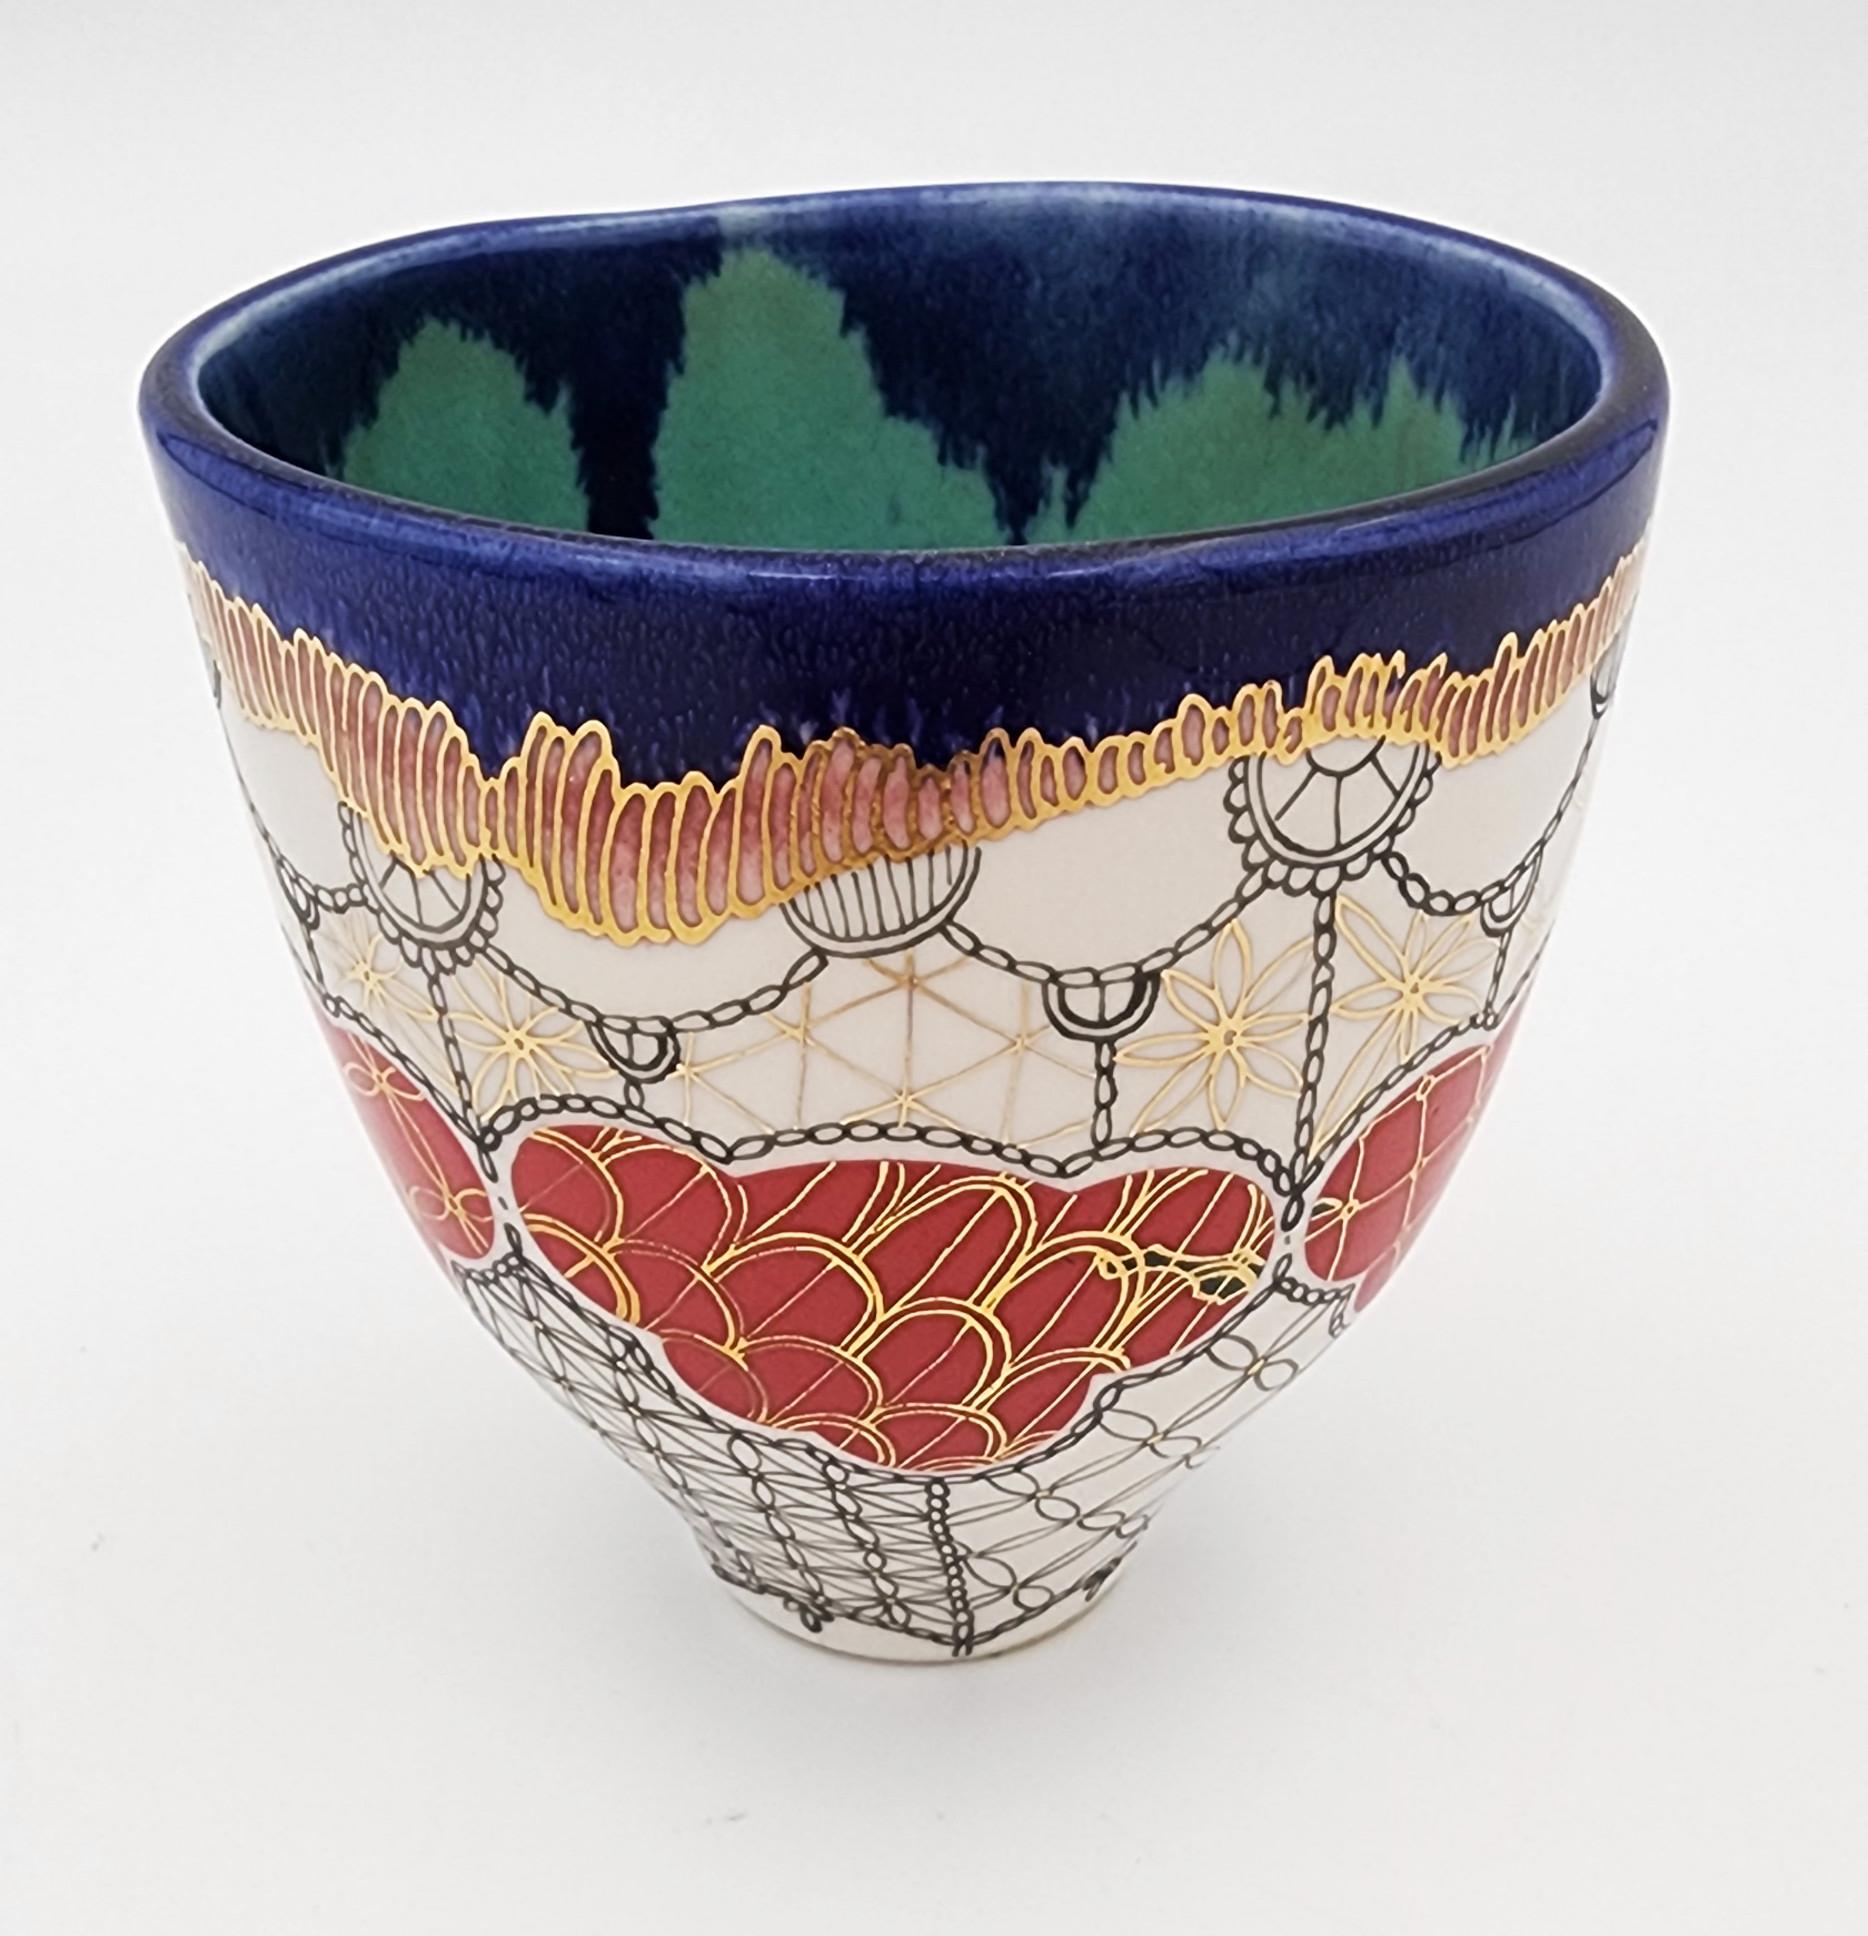 Melanie Sherman
Cup with Patterns I (Hand-Painted, Gold Luster)
Porcelain, Glaze, Porcelain Paint, Hand-made Vintage Decals, Gold Luster, Platinum Luster
Year: 2022
Size: 4x3.5x3.5in
Signed by hand
COA provided
Ref.: 24802-1737

Tags: Flowers,